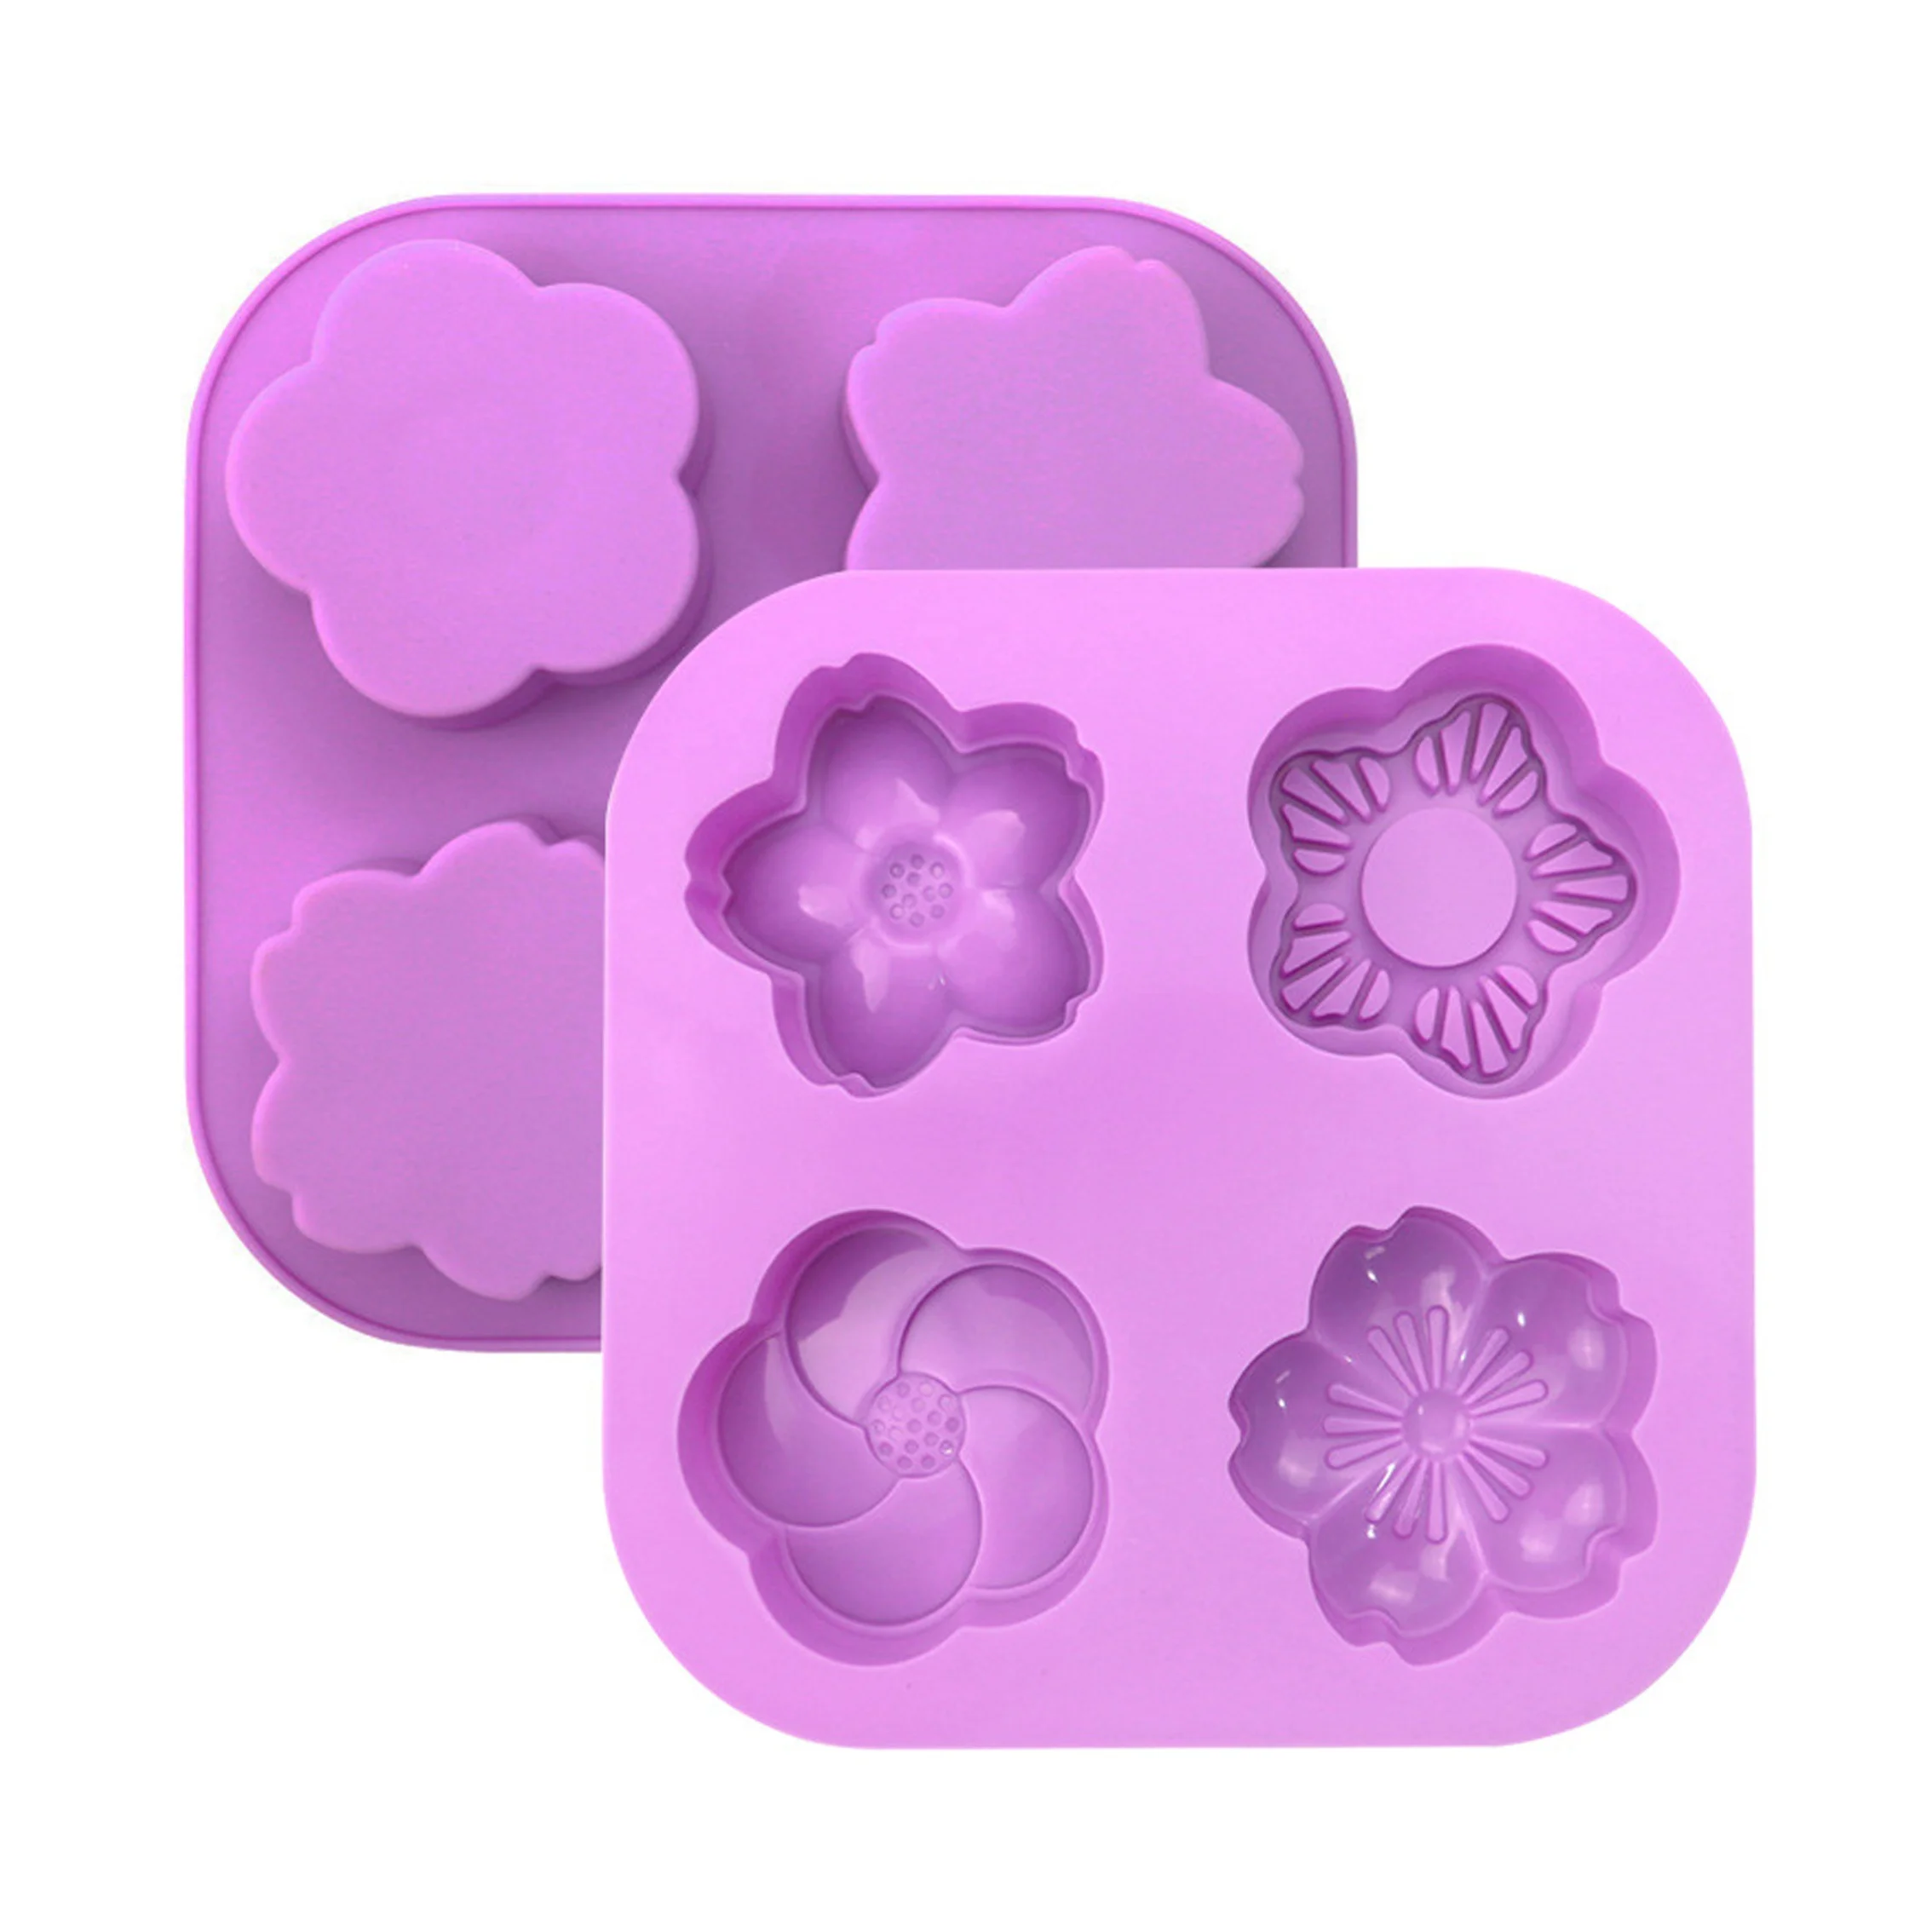 4 multi style flower shaped silicone cake mold high quality reusable candy chocolate soap silicone mold cake tools